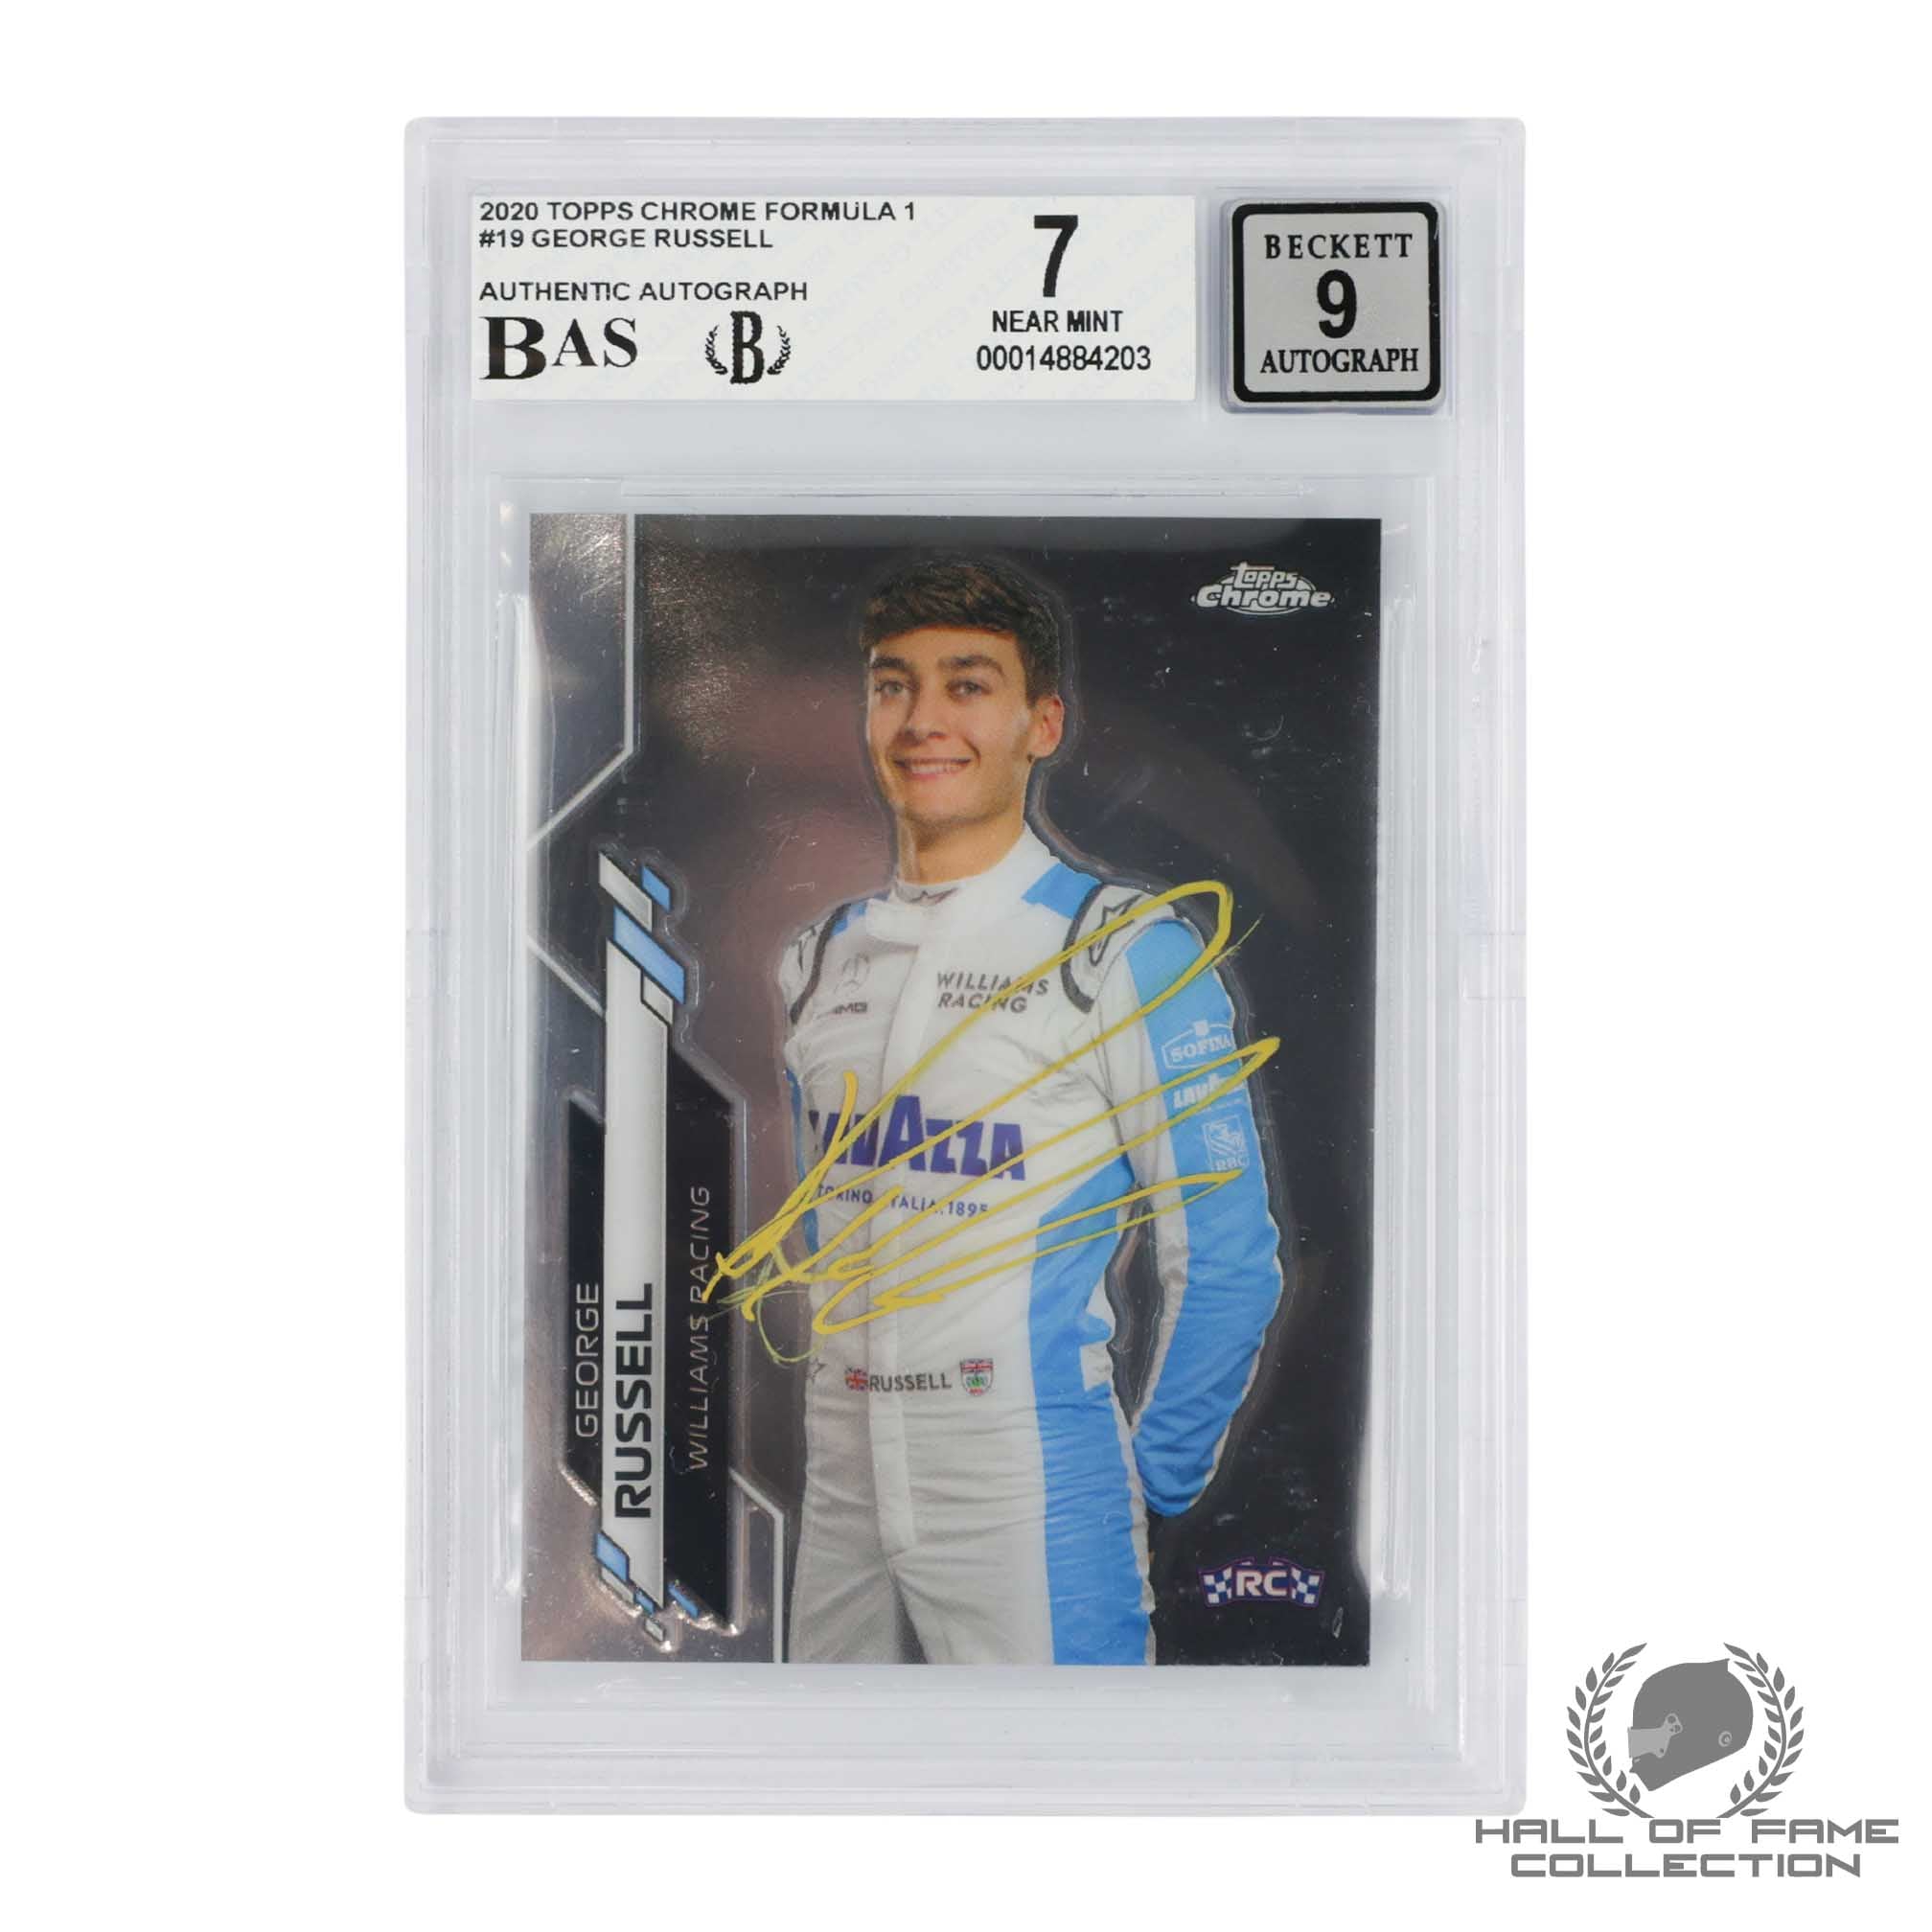 2020 Topps Chrome Formula 1 #19 George Russell RC Mint 7 Authentic Autograph 9